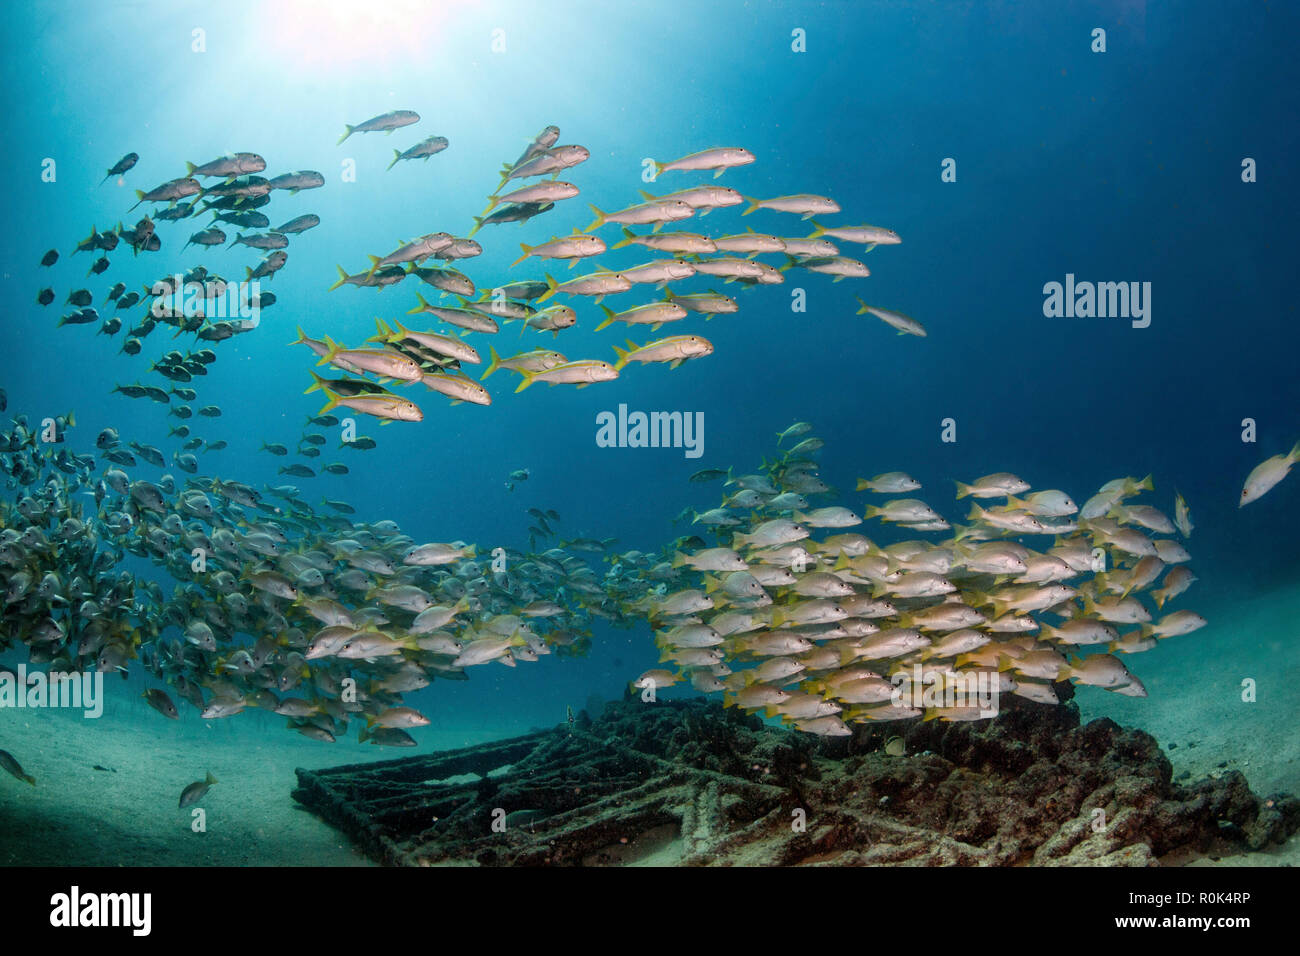 School of yellow snapper swimming over the wreck of El Vencedor in the Sea of Cortez. Stock Photo